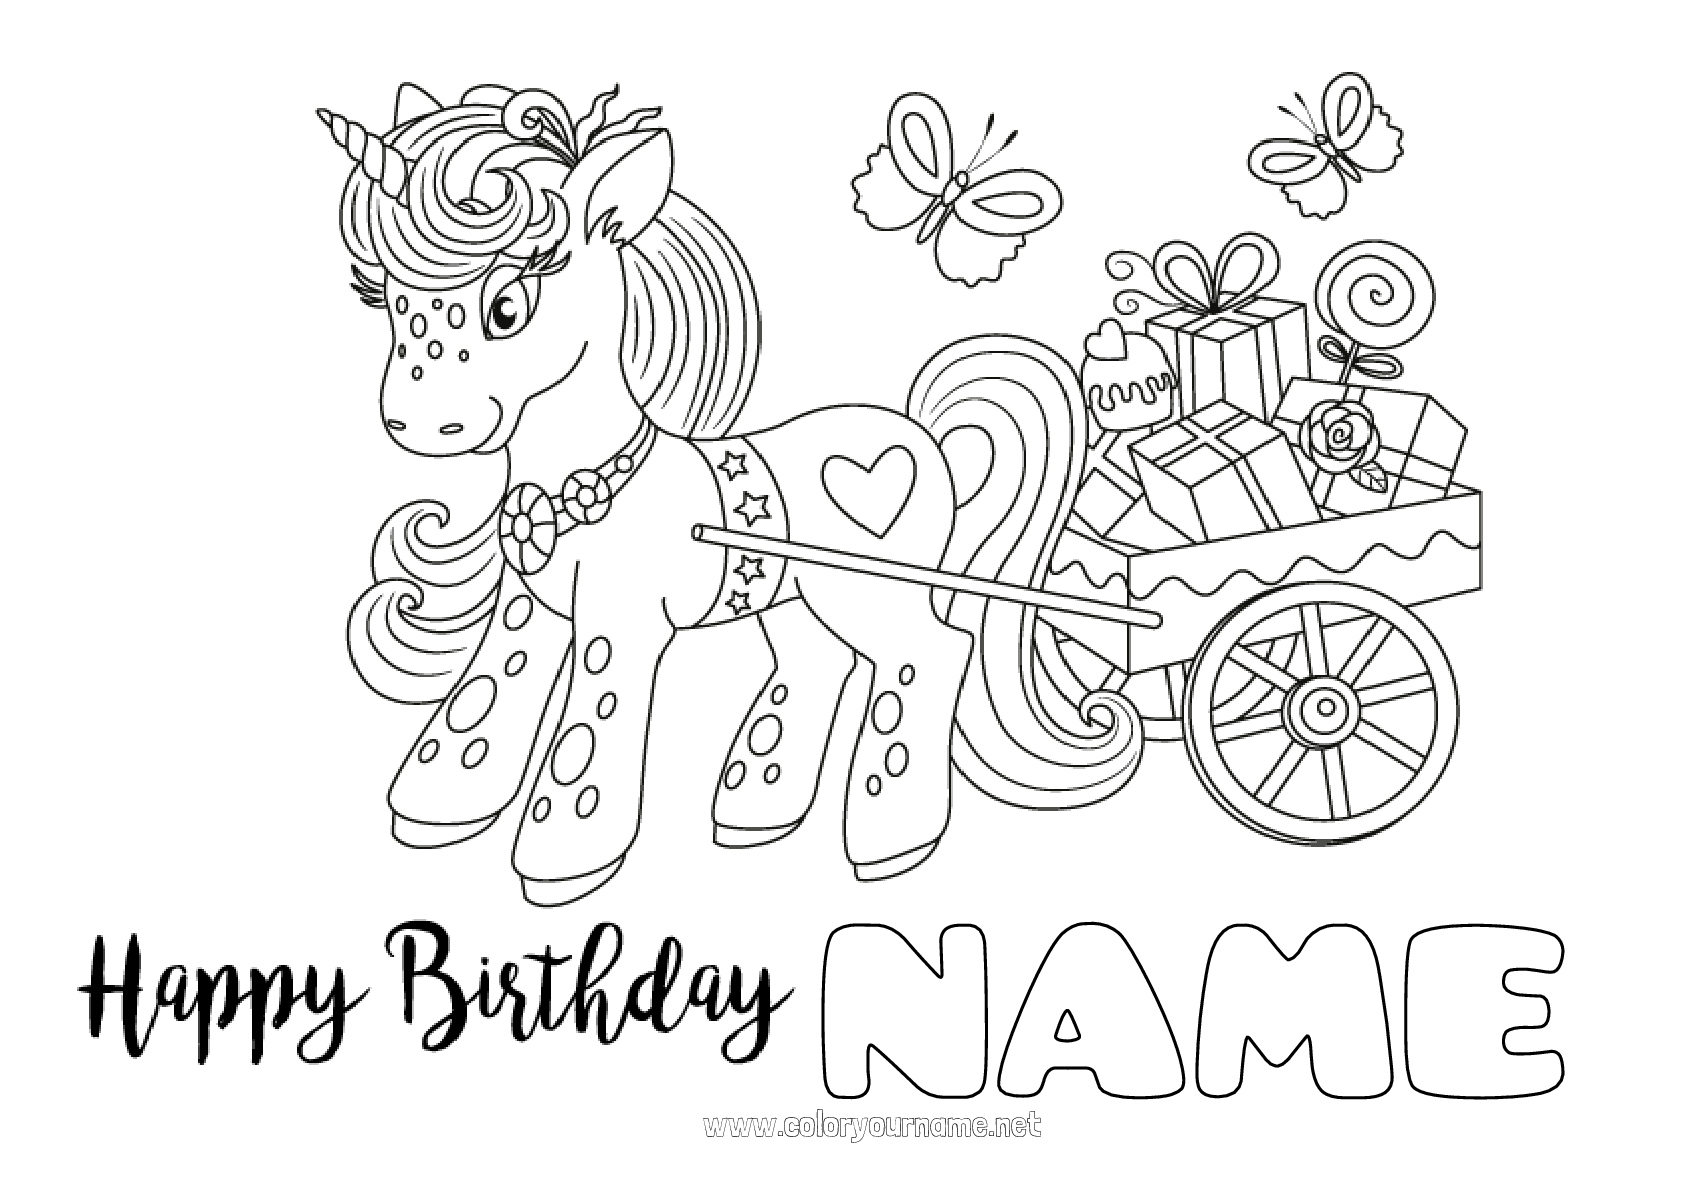 coloring-page-no-206-gifts-birthday-unicorn